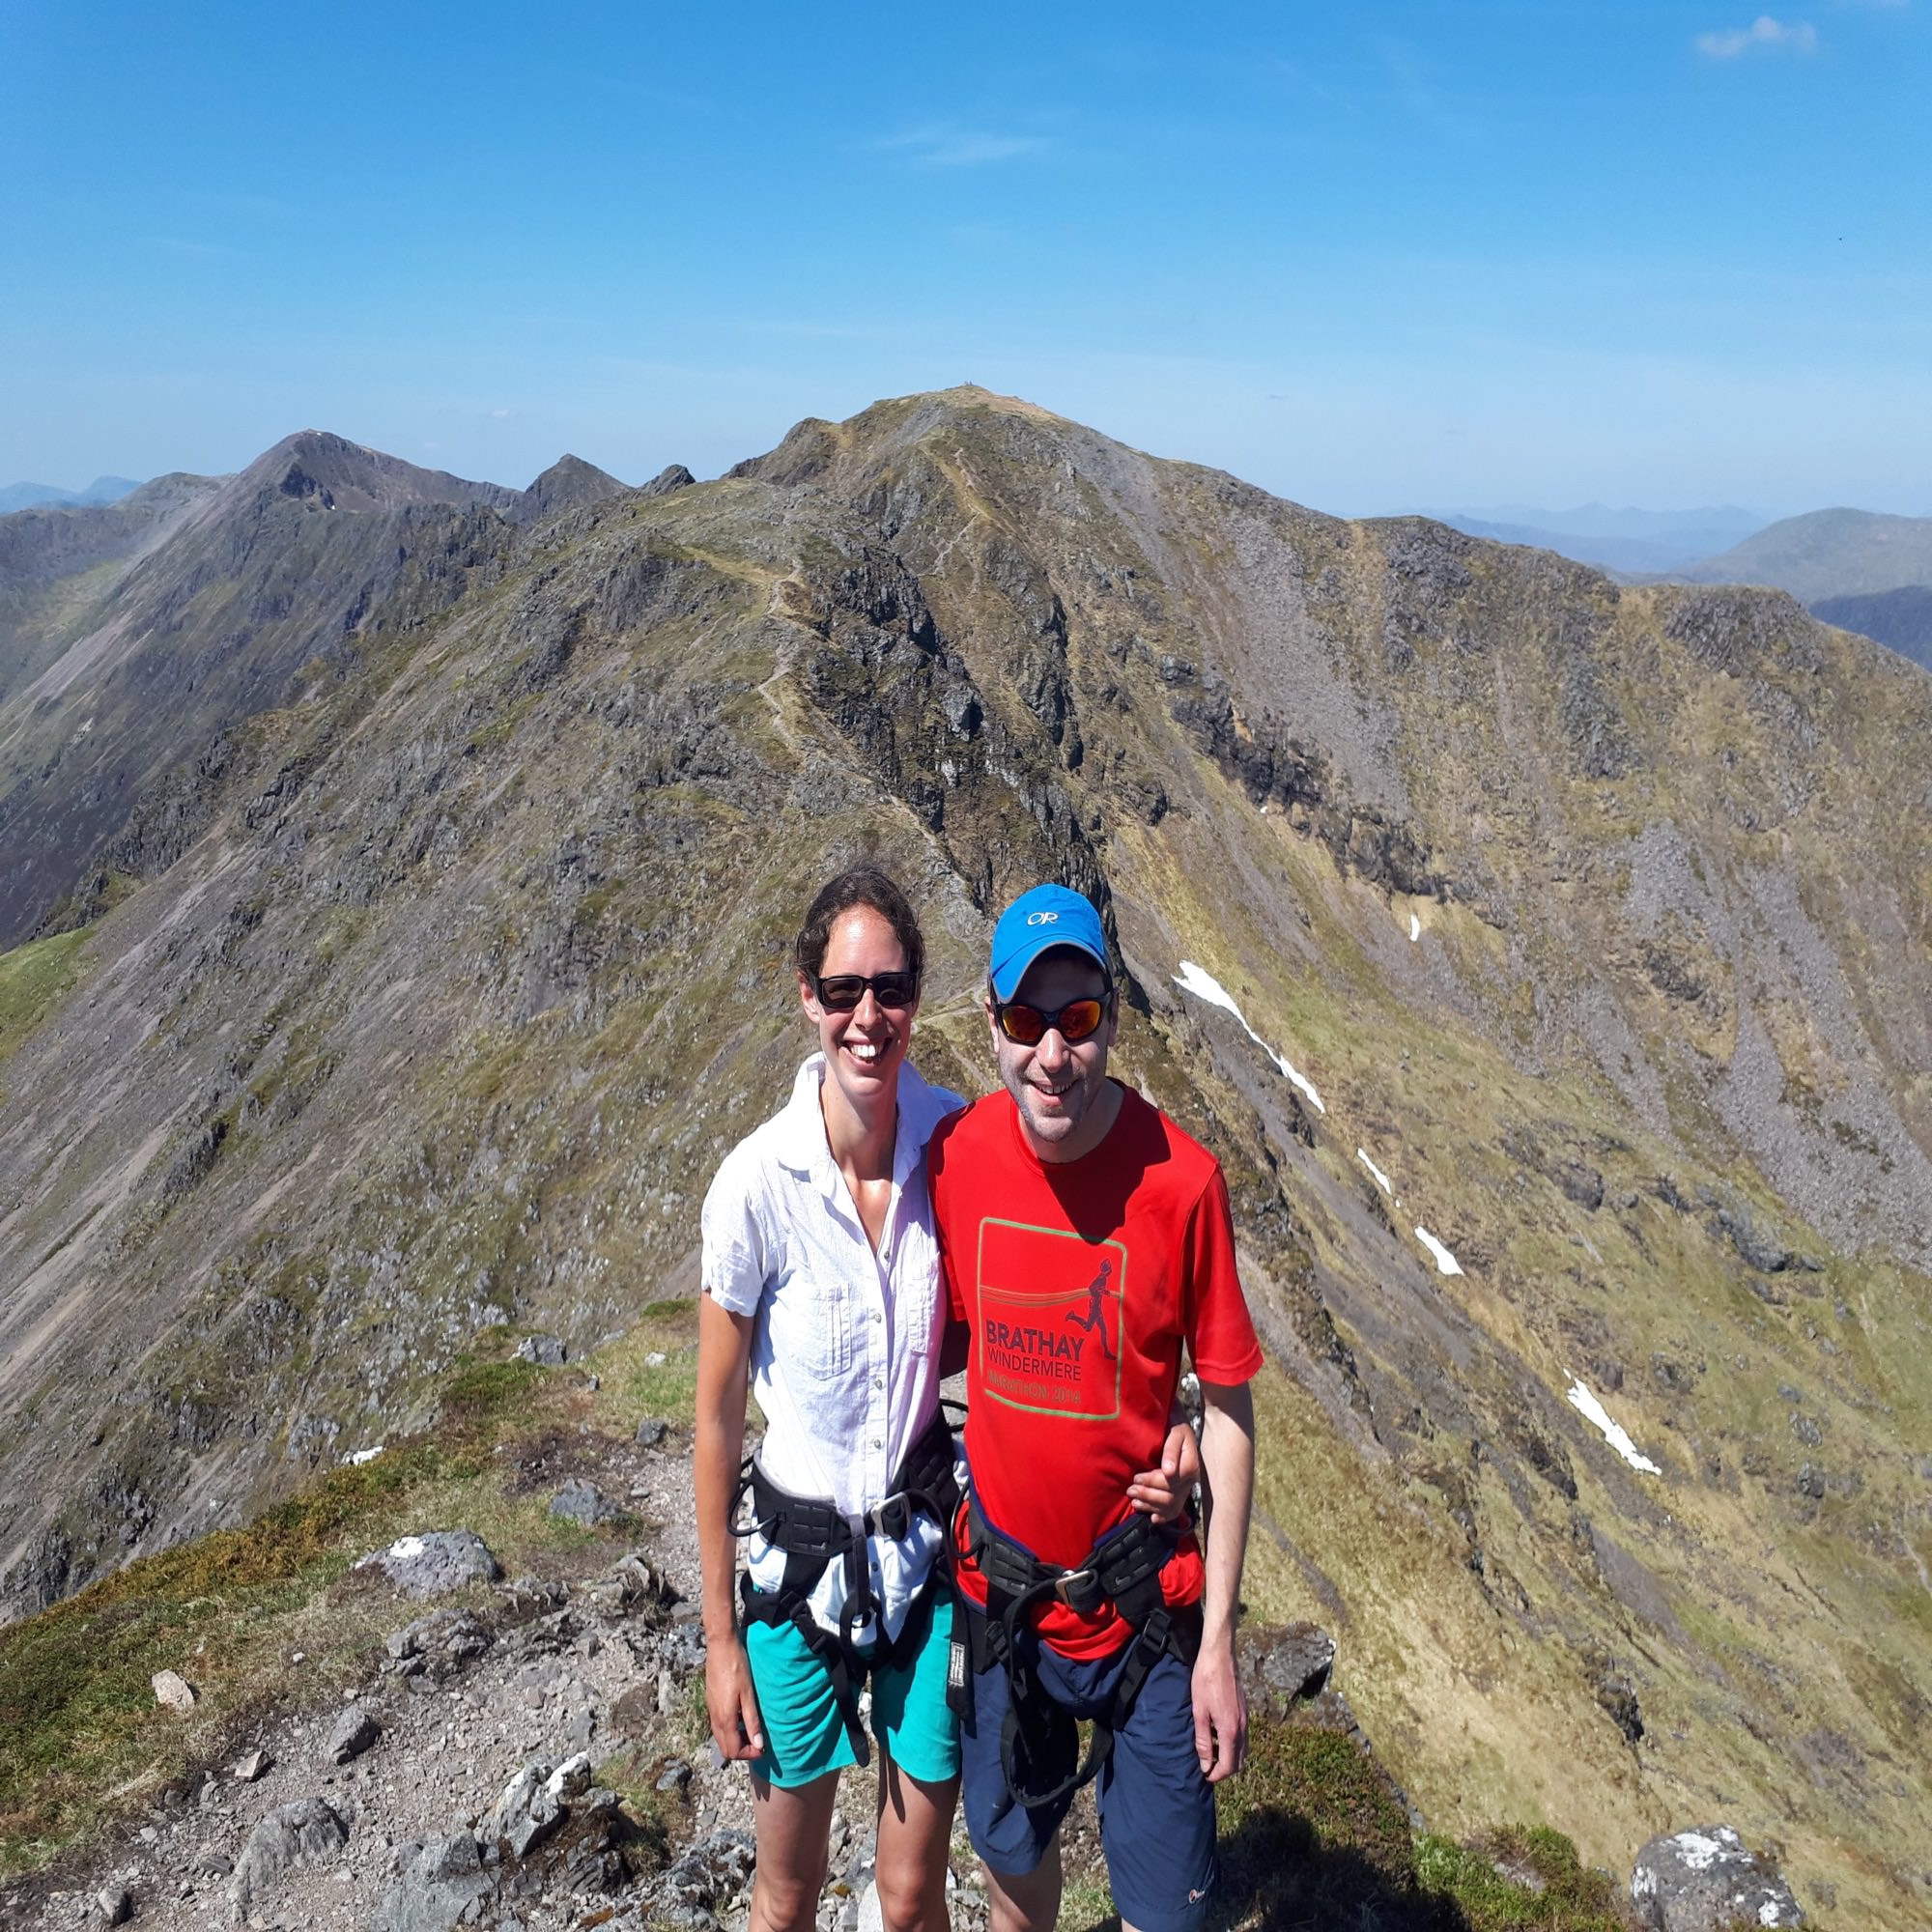 Up on the Aonach Eagach ridge in perfect weather